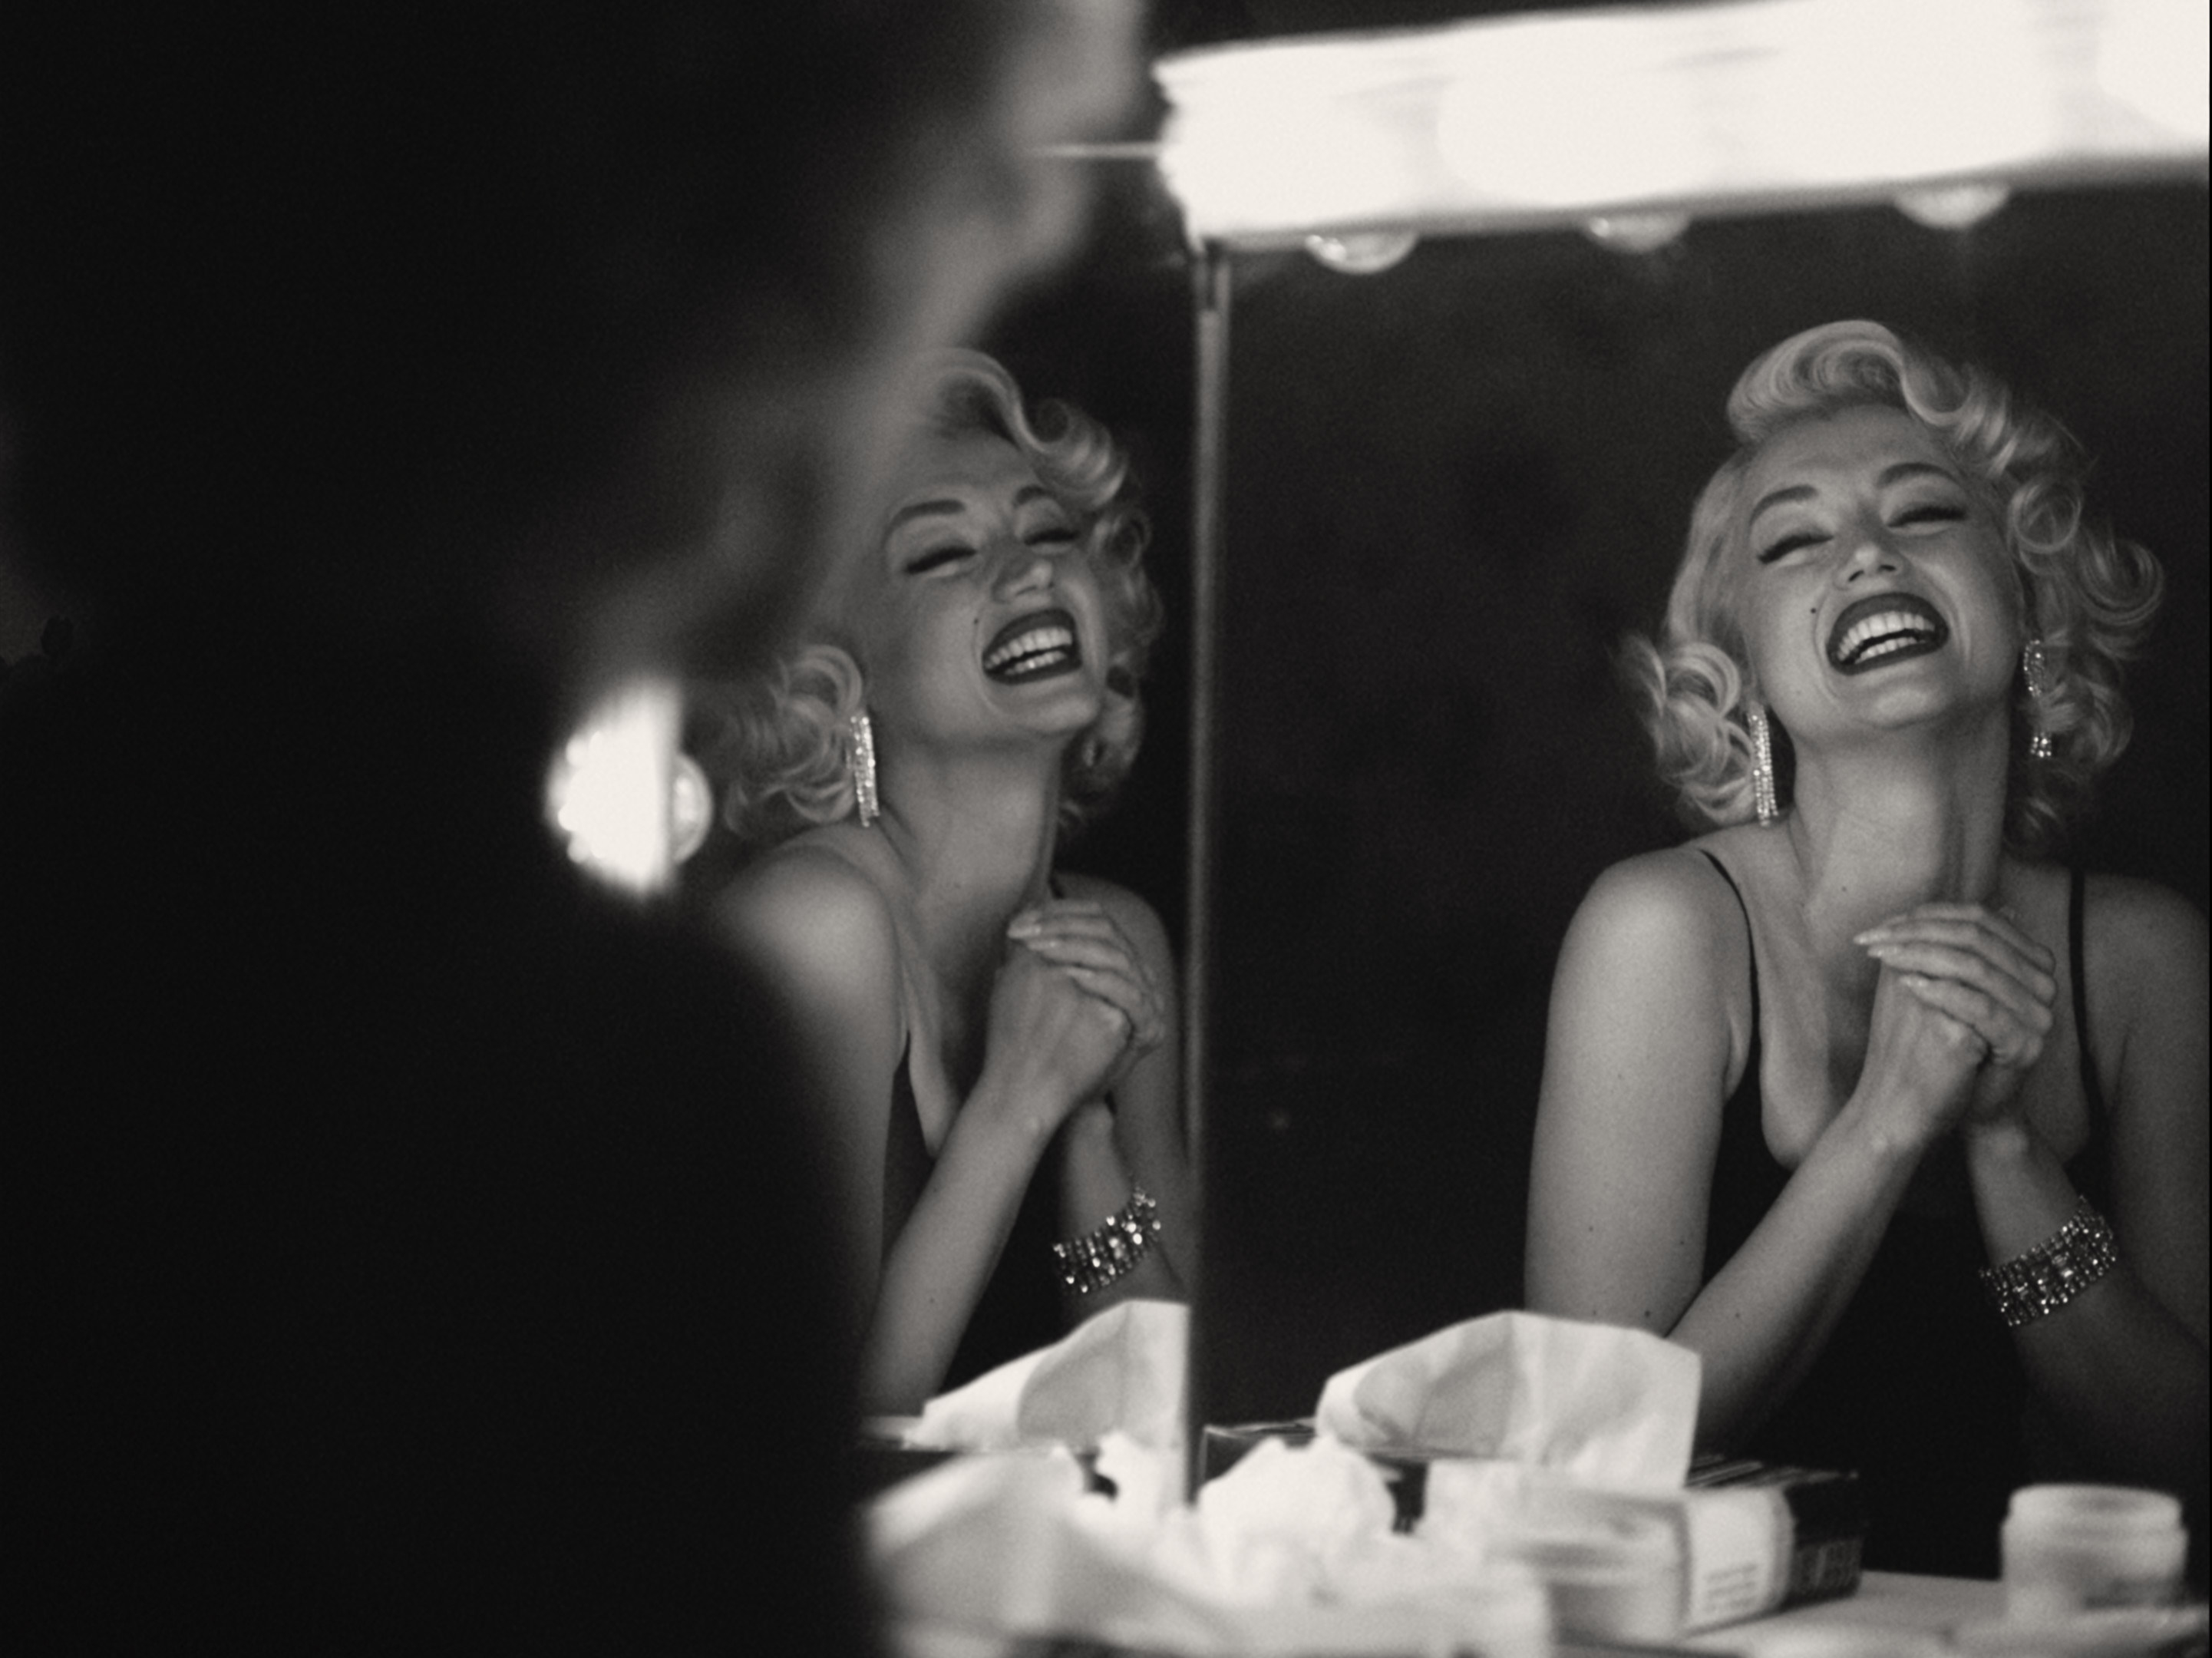 A woman smiling in the mirror and her reflection